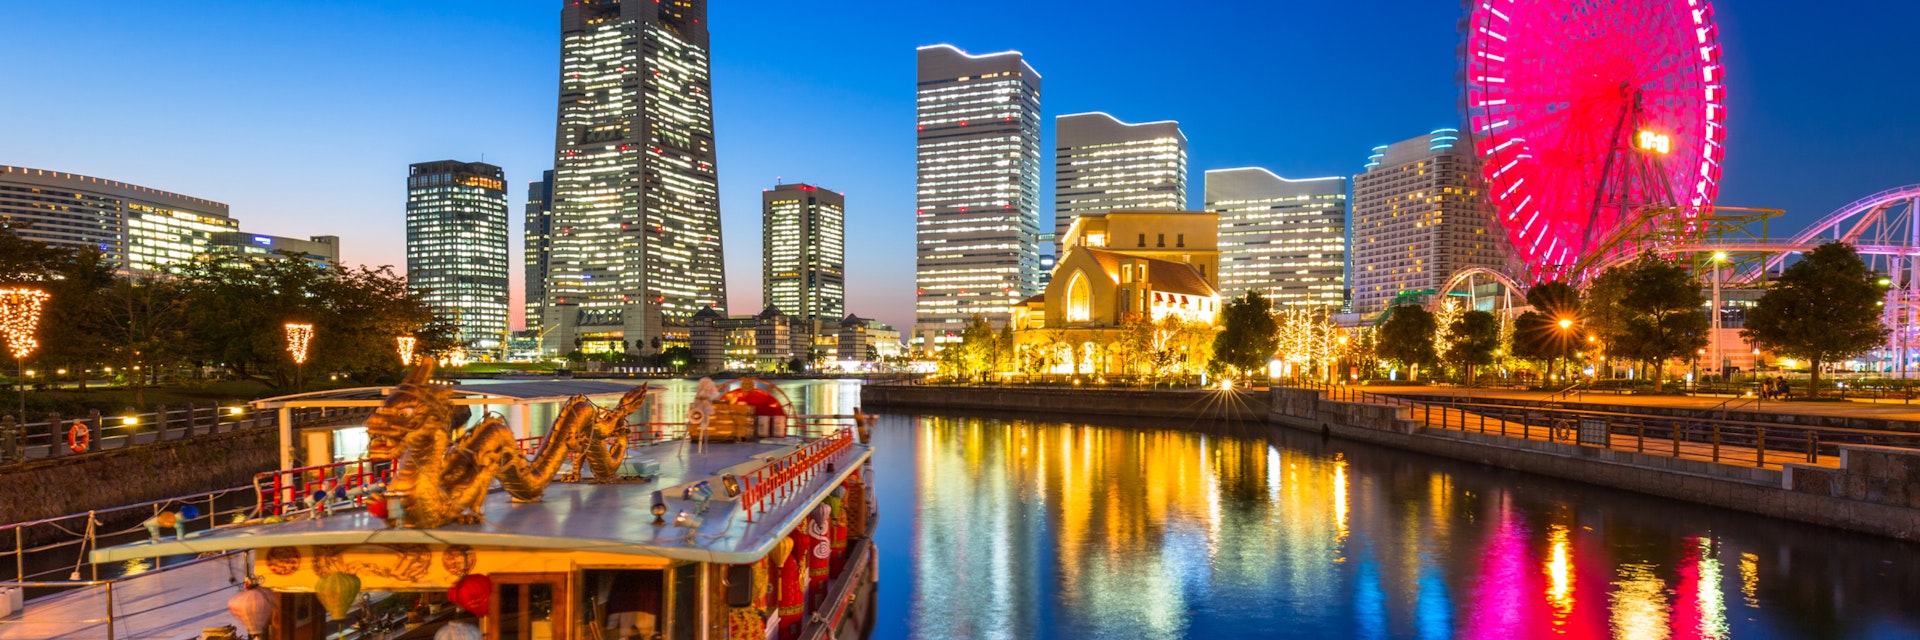 Cityscape of Yokohama city at dusk, Japan; Shutterstock ID 532686832; Your name (First / Last): Laura Crawford; GL account no.: 65050; Netsuite department name: Online Editorial; Full Product or Project name including edition: BiA: Takayama, south of Tokyo POI images for online